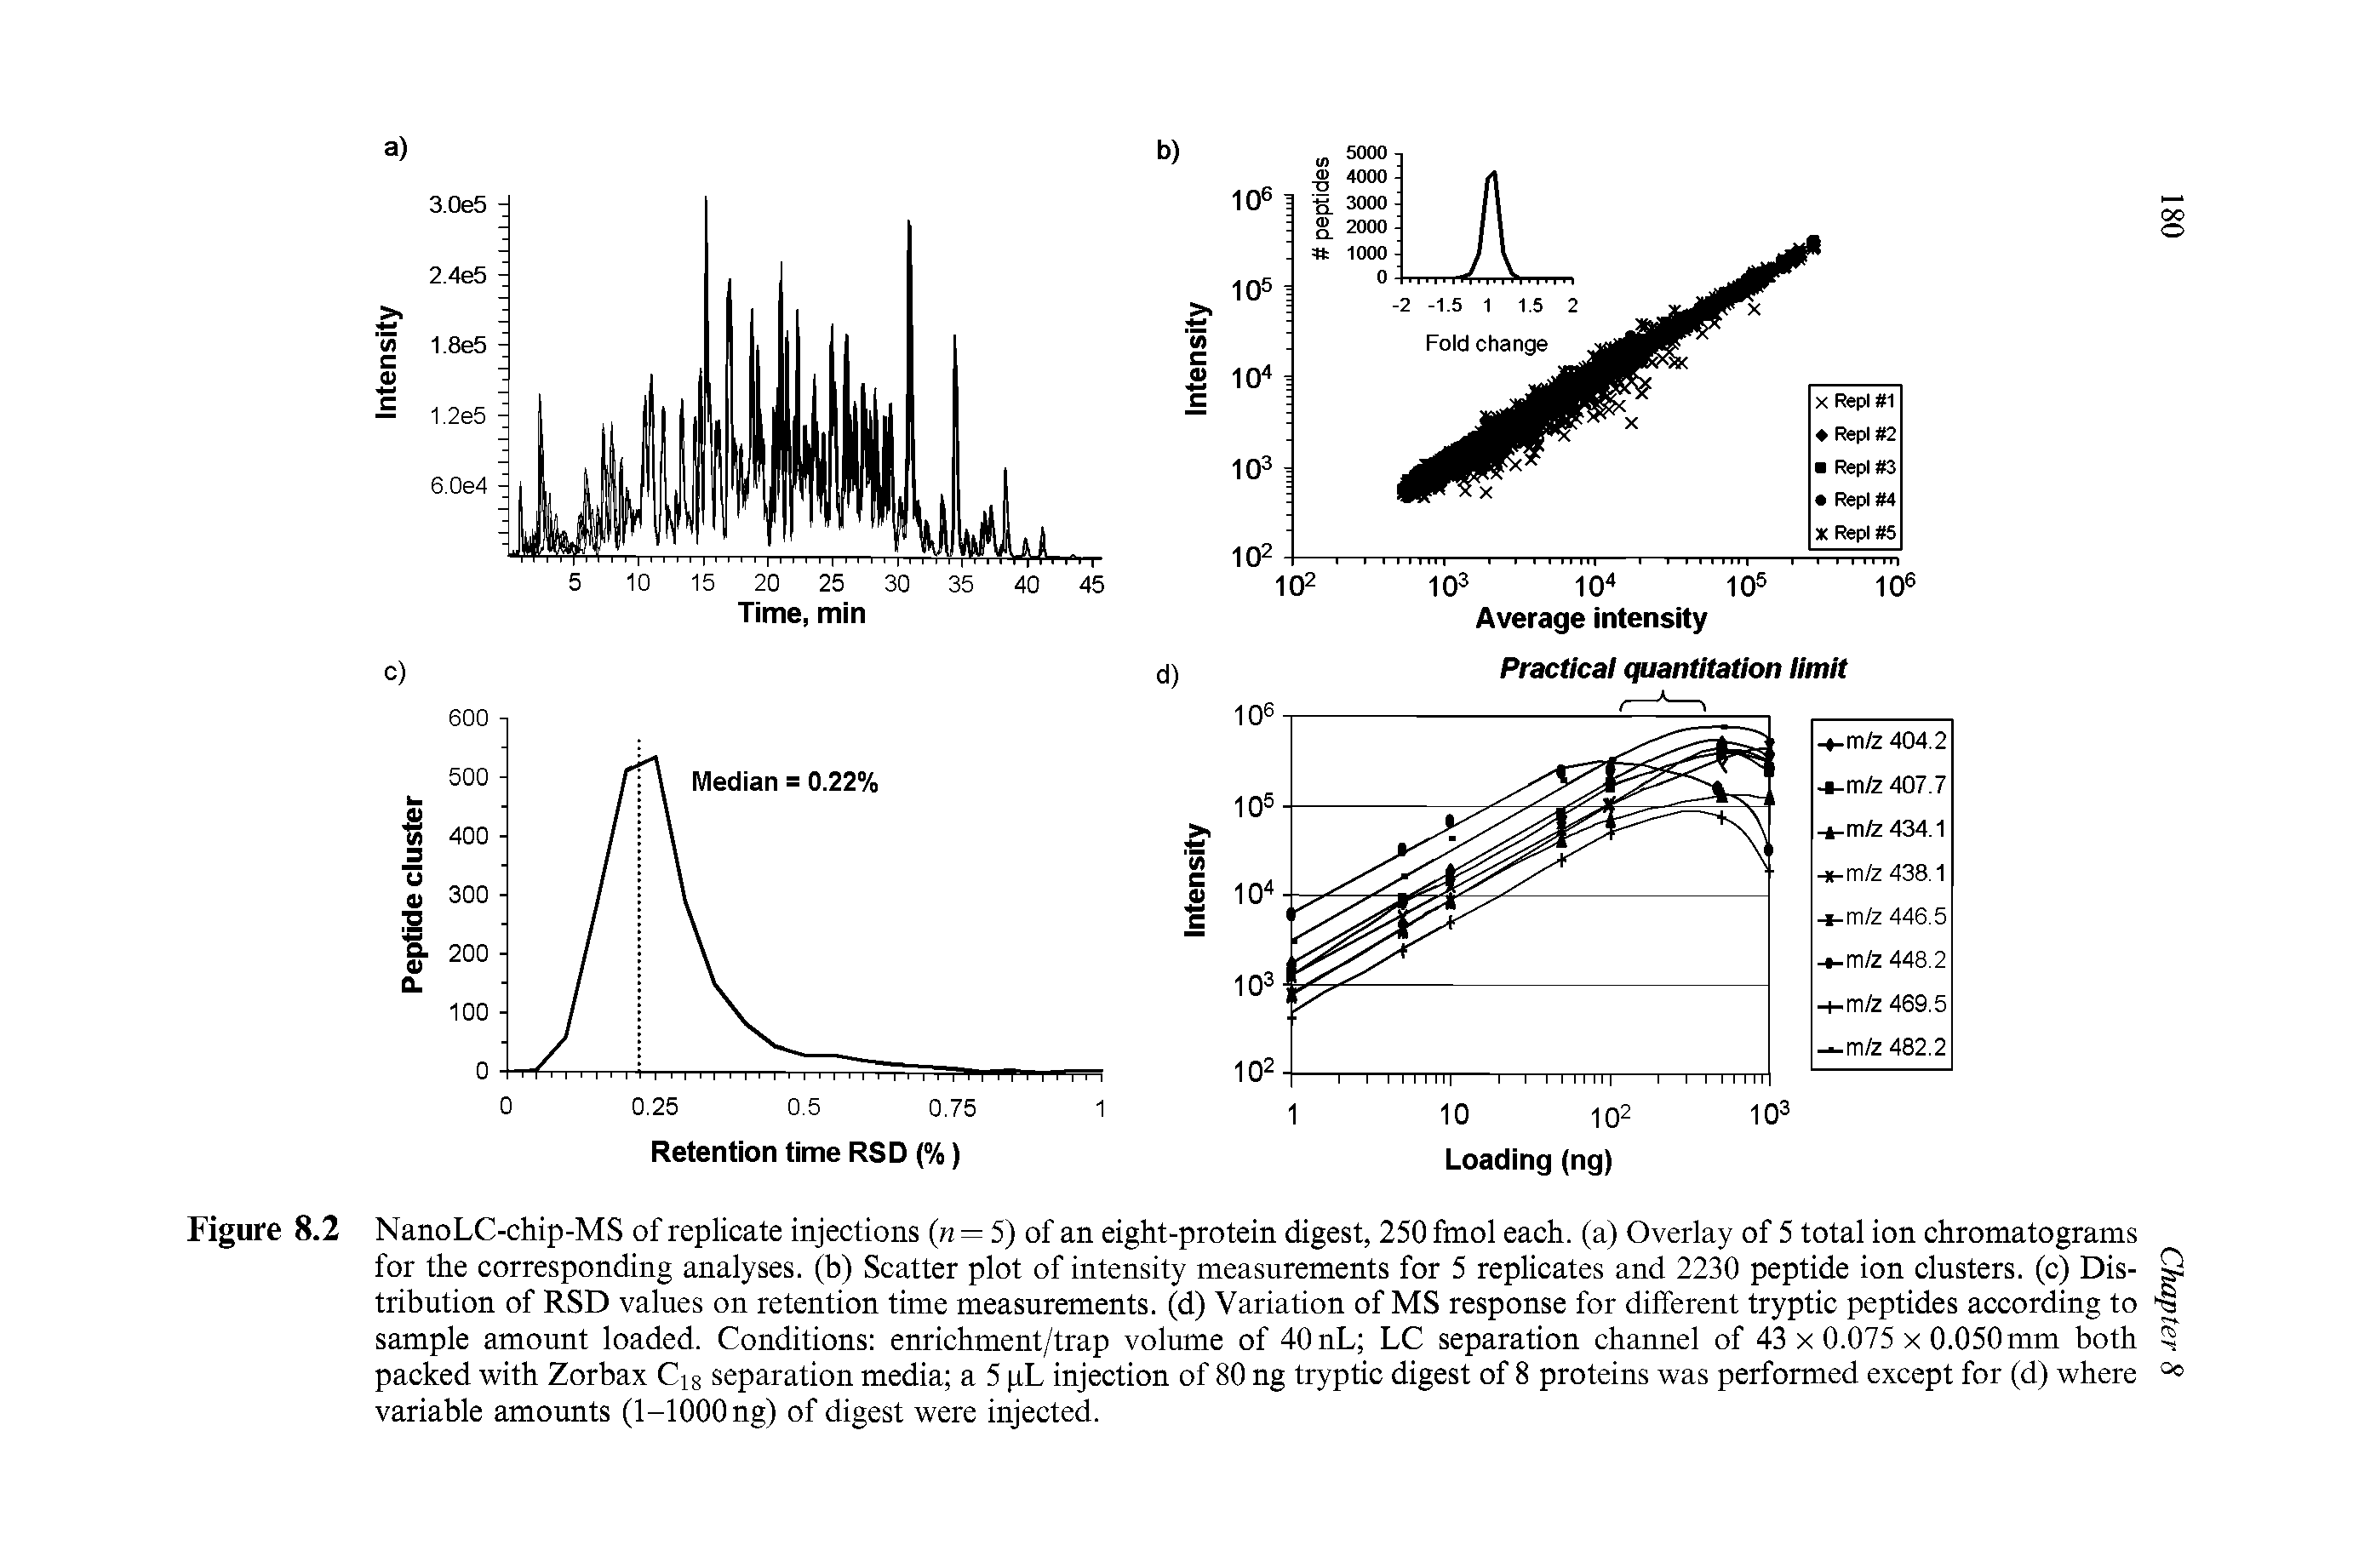 Figure 8.2 NanoLC-chip-MS of replicate injections (n — 5) of an eight-protein digest, 250 fmol each, (a) Overlay of 5 total ion chromatograms for the corresponding analyses, (b) Scatter plot of intensity measurements for 5 replicates and 2230 peptide ion clusters, (c) Distribution of RSD values on retention time measurements, (d) Variation of MS response for different tryptic peptides according to sample amount loaded. Conditions enrichment/trap volume of 40nL LC separation channel of 43 x 0.075 x 0.050mm both packed with Zorbax Ci8 separation media a 5 pL injection of 80 ng tryptic digest of 8 proteins was performed except for (d) where variable amounts (1-1000 ng) of digest were injected.